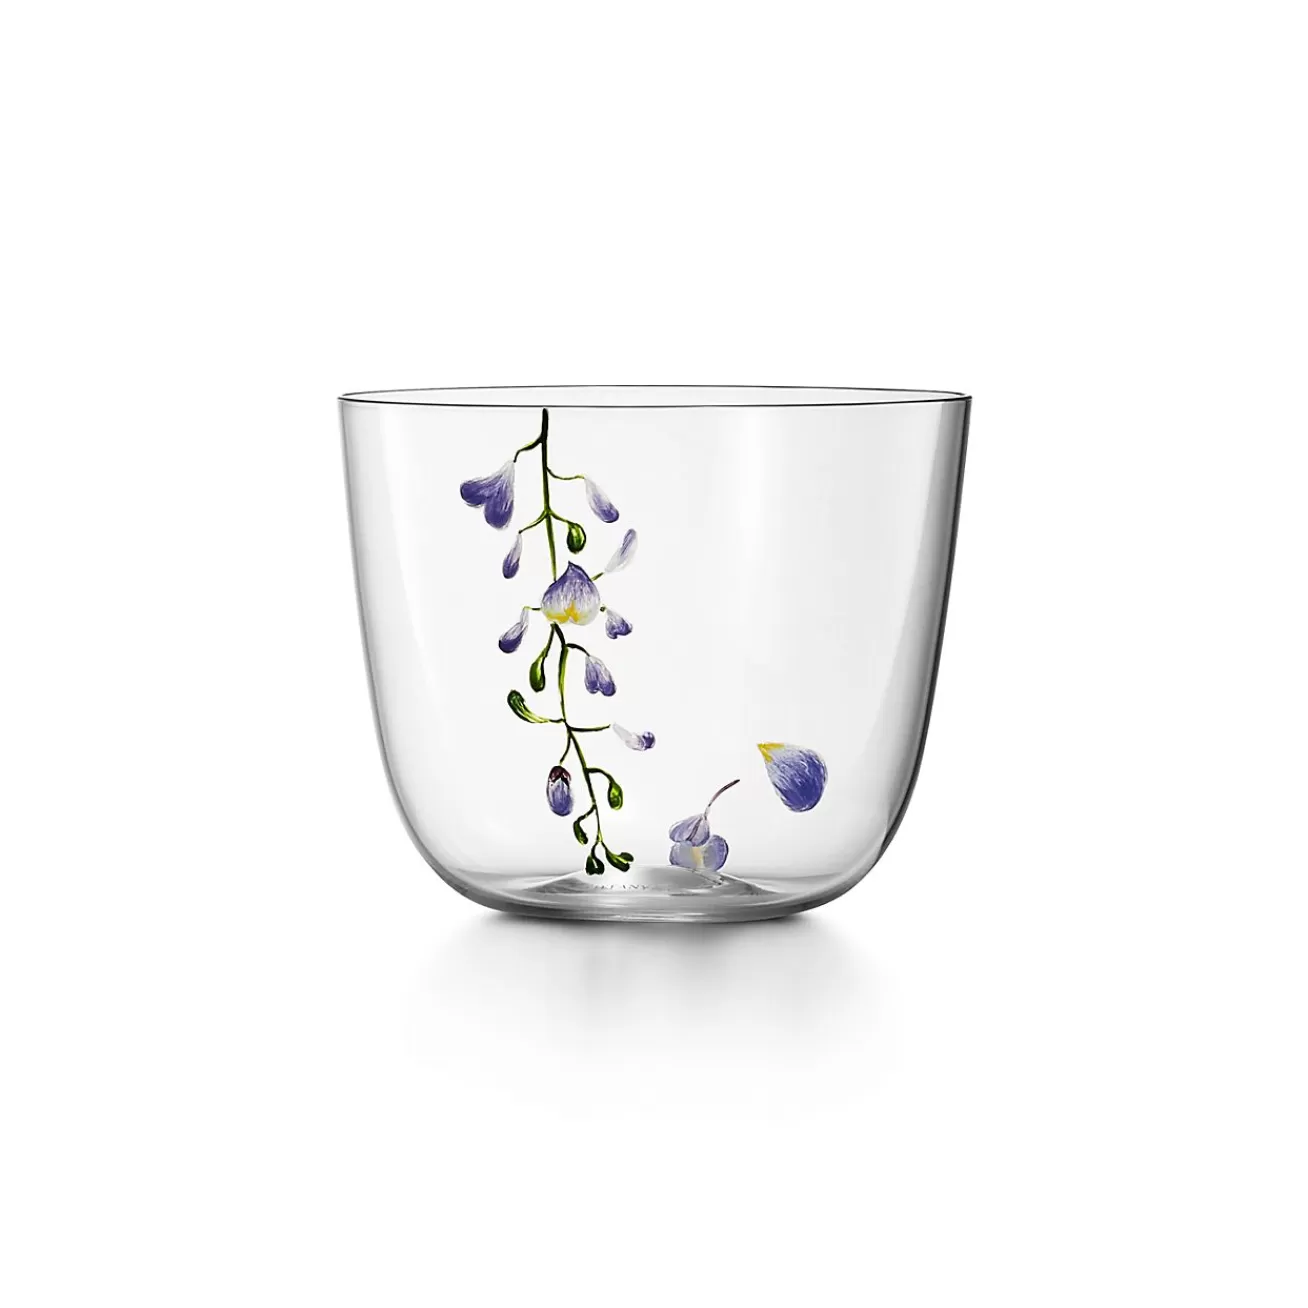 Tiffany & Co. Tiffany Wisteria Water Glass in Glass | ^ The Couple | Wedding Gifts